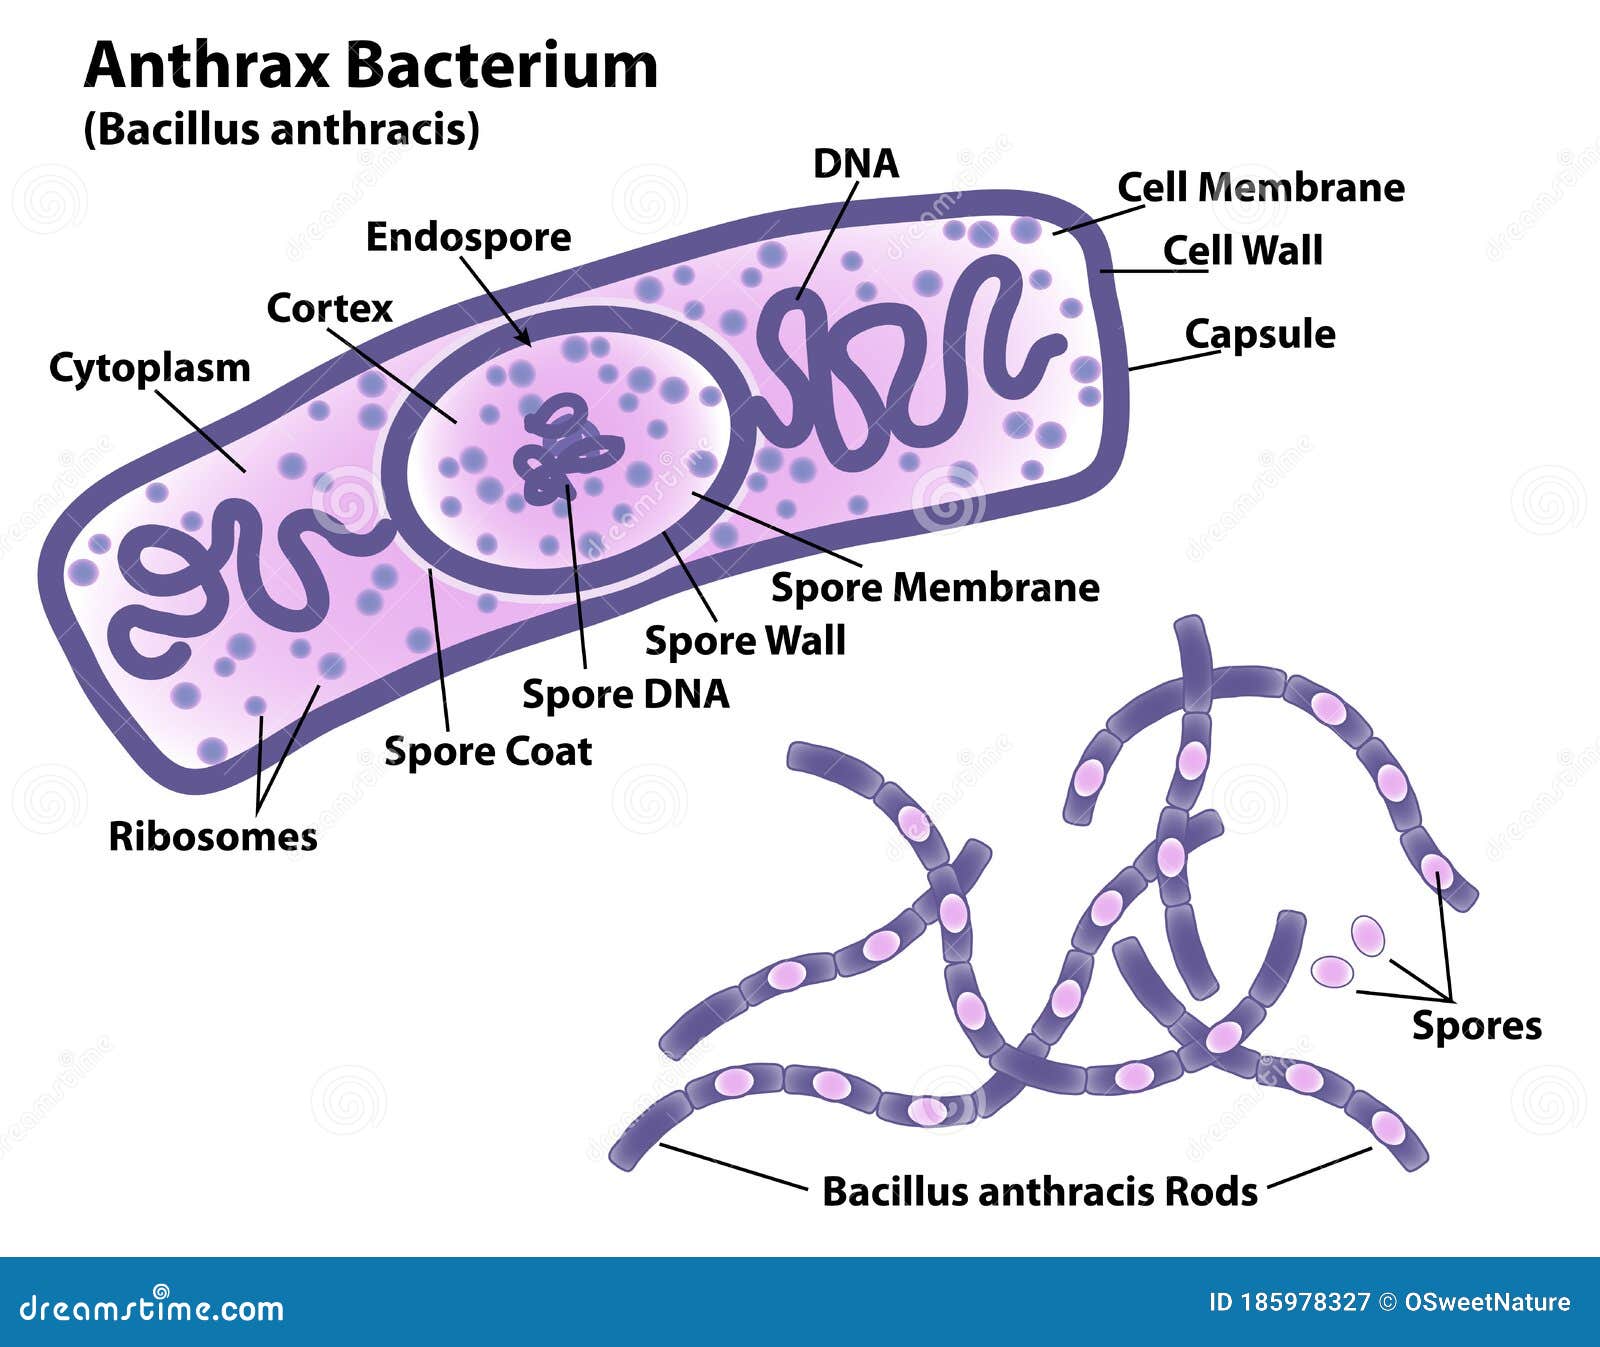 anthrax bacteria morphology and cell